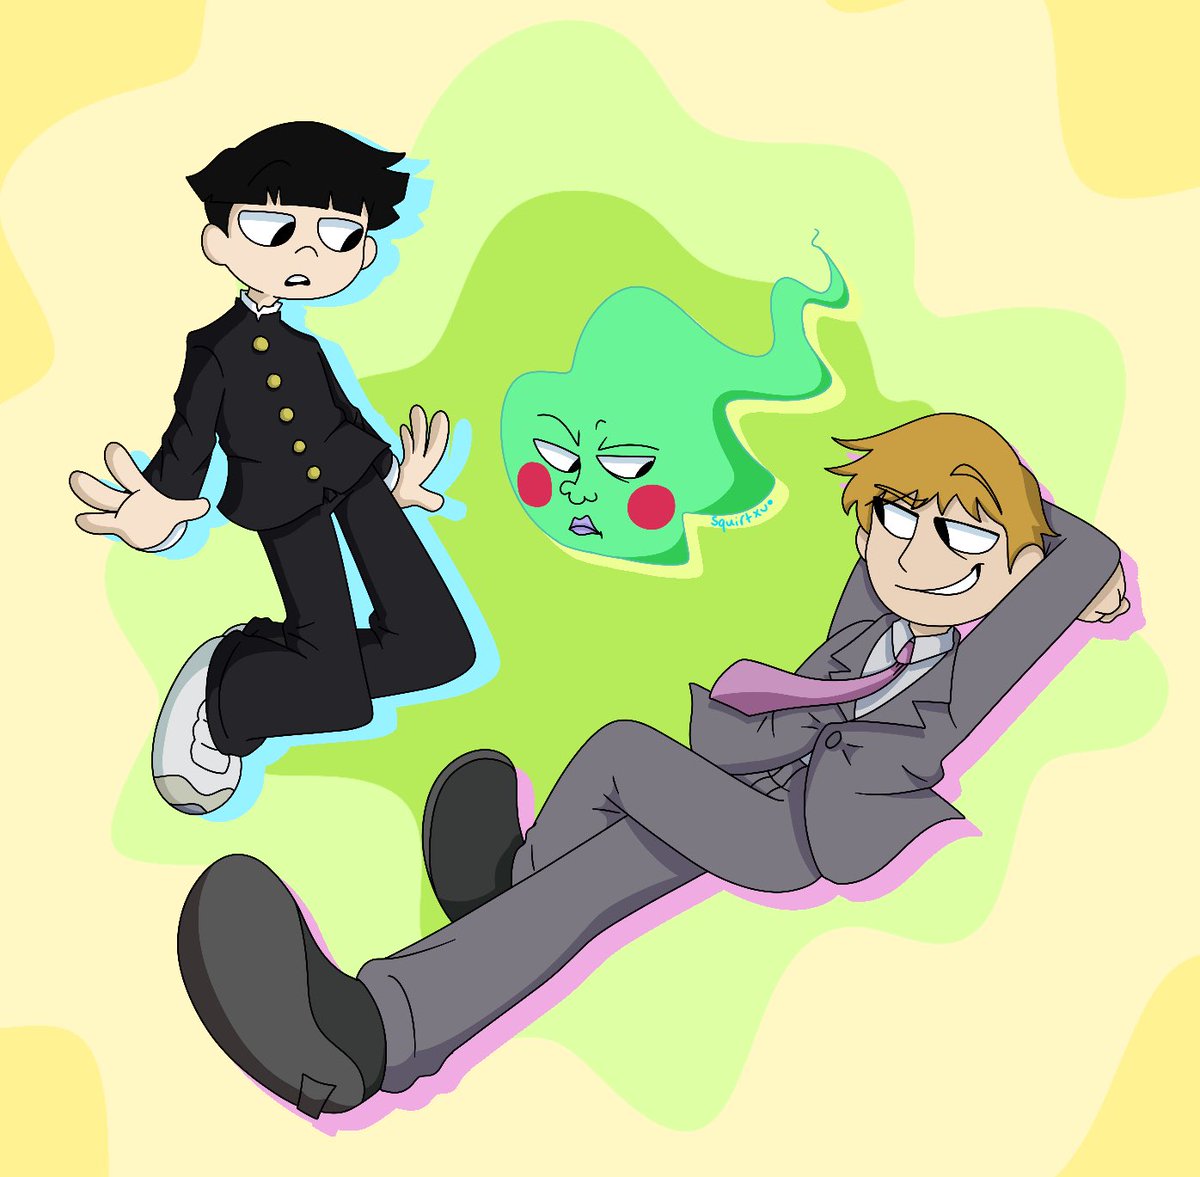 hello mob psycho fandom (please no spoilers i haven’t finished season 2 yet) more art in the thread! #mobpsycho100 #mobpsycho